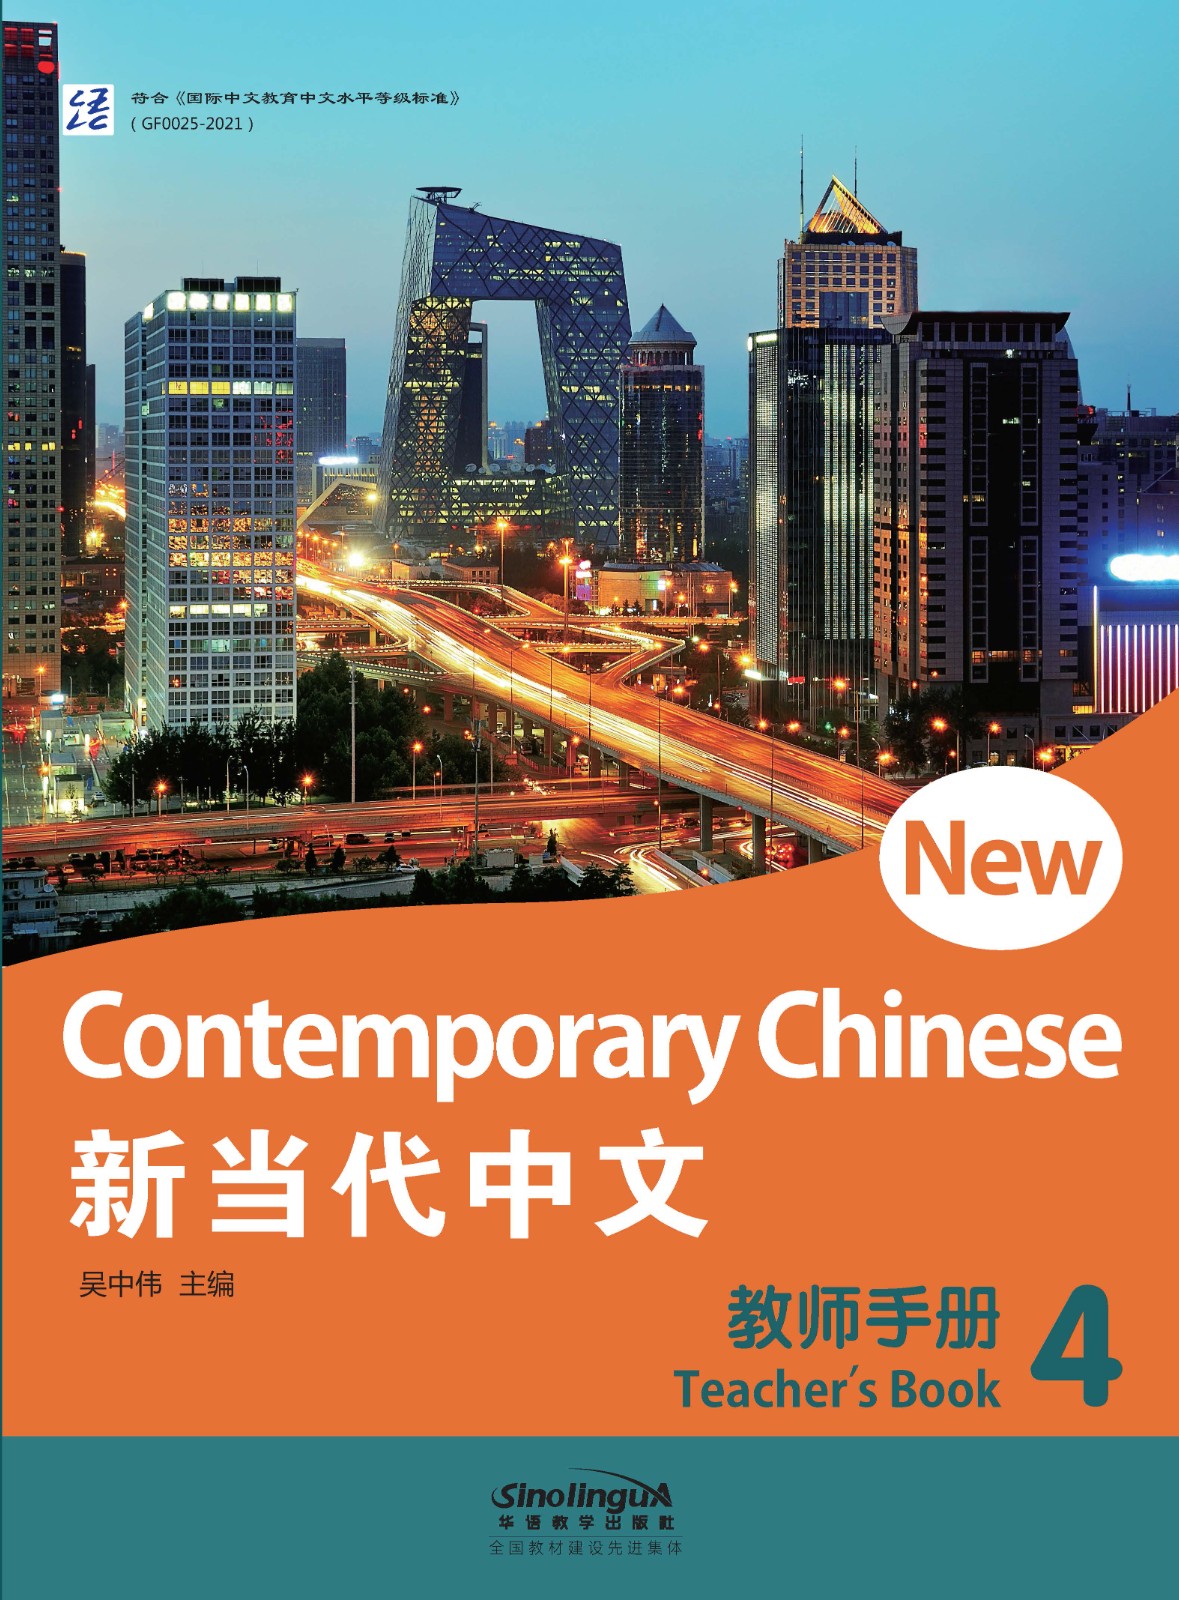 New Contemporary Chinese--Teacher's Book 4